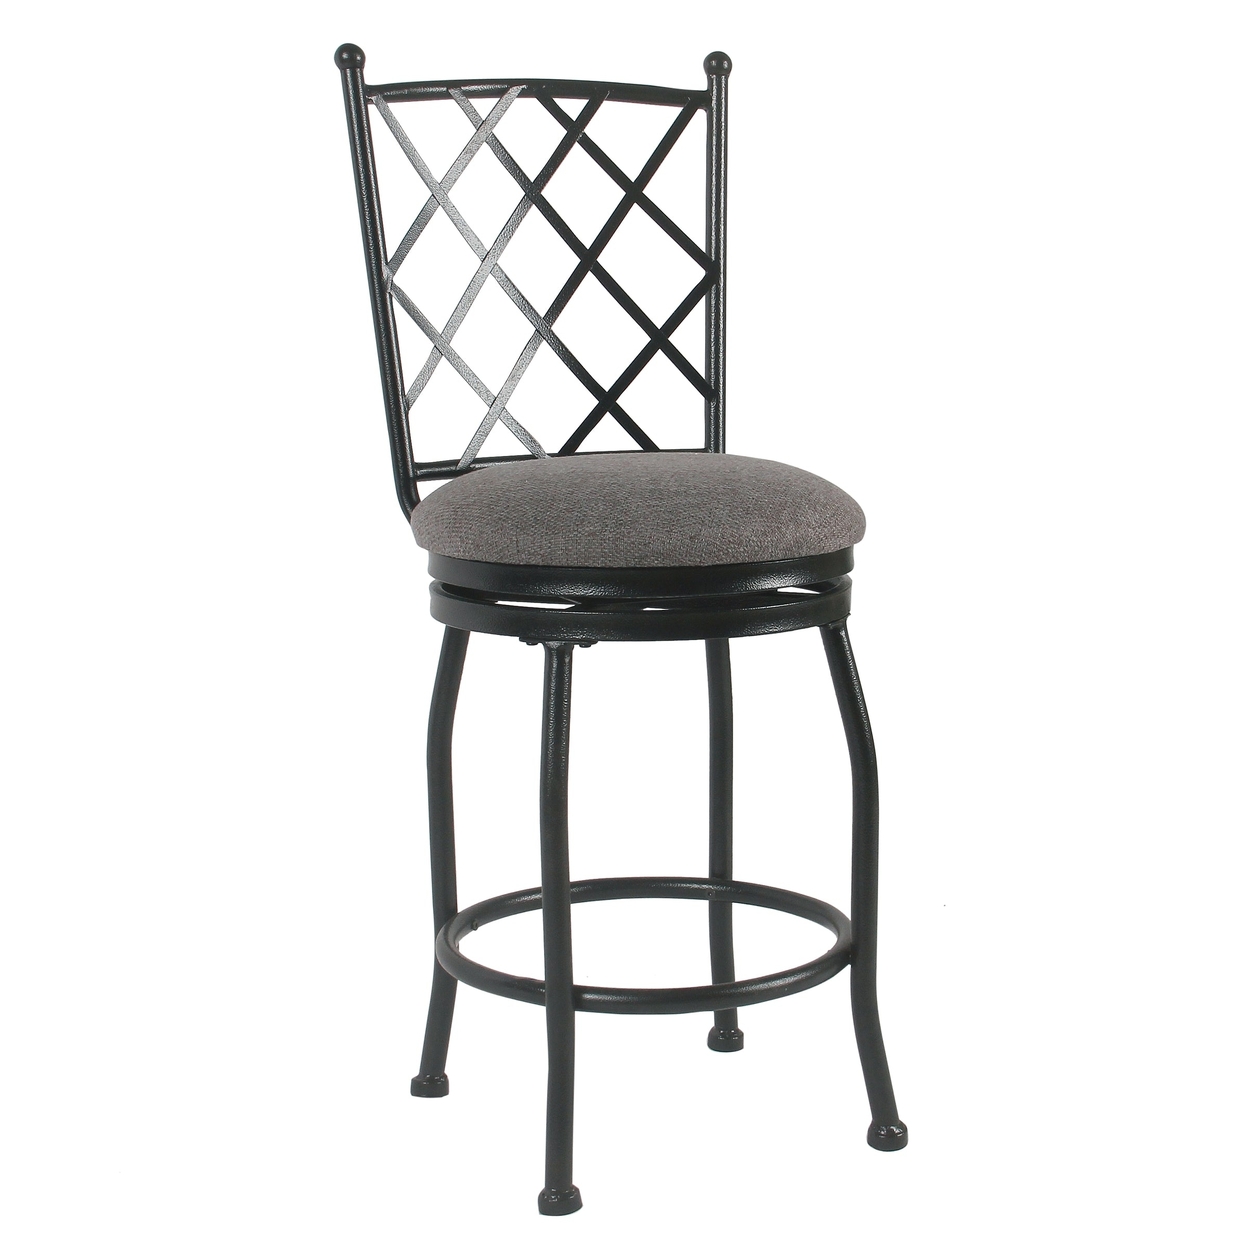 Metal Swivel Counter Height Stool With Padded Fabric Seat And Criss Cross Backrest, Gray- Saltoro Sherpi